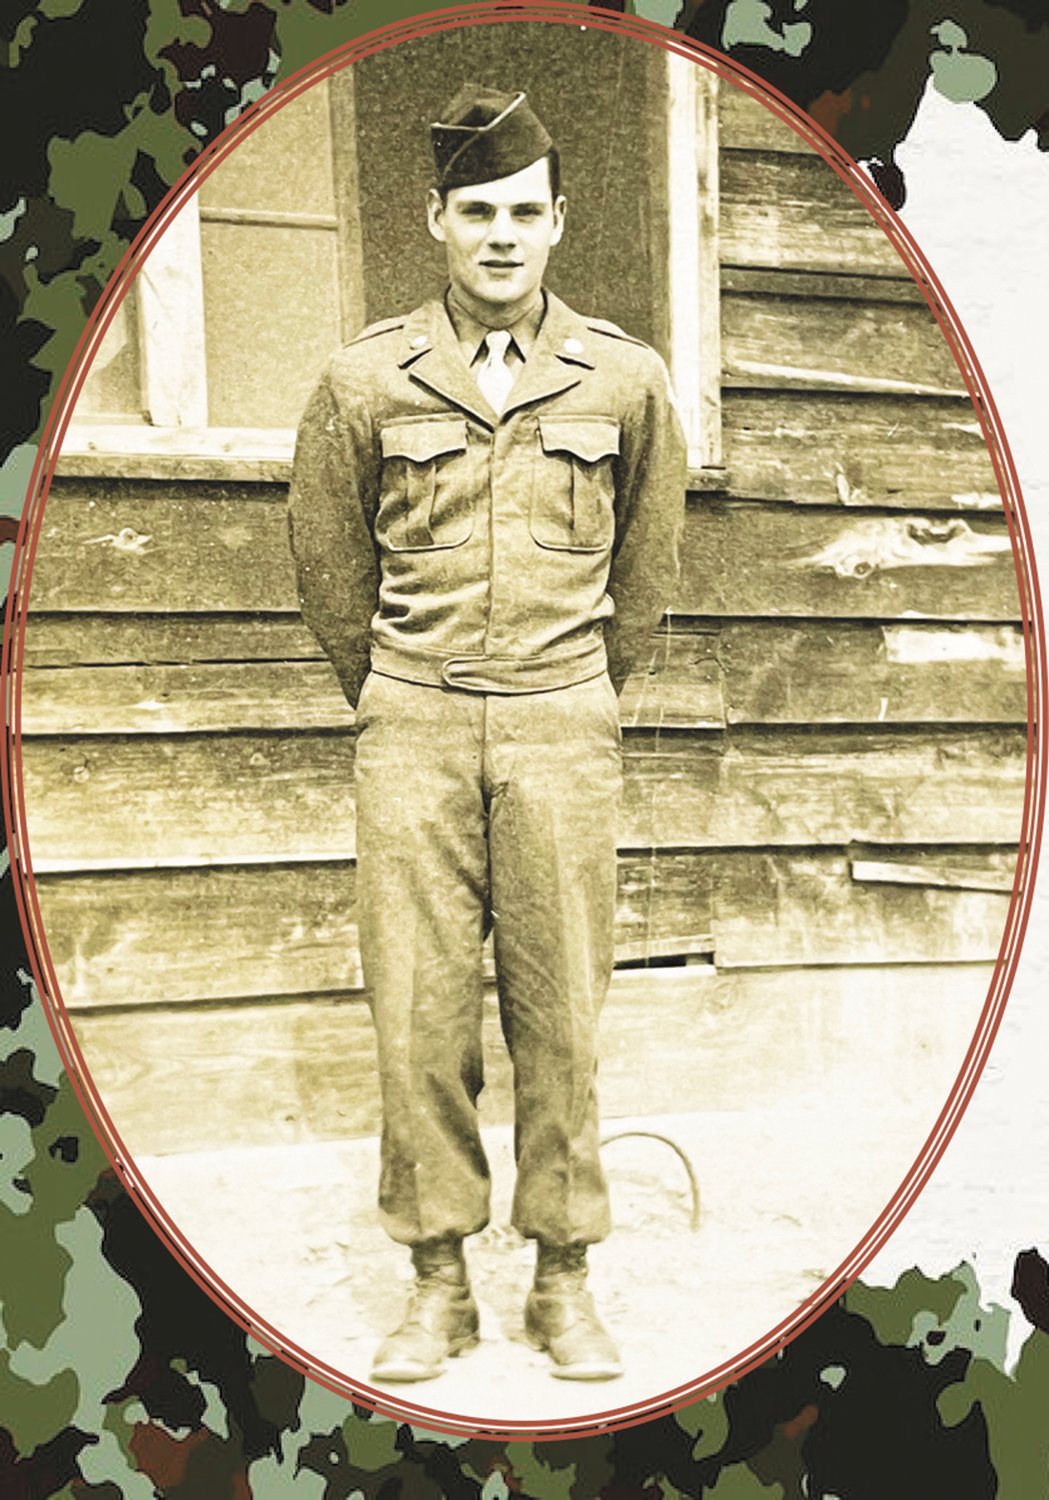 Ulysses resident Kellye Hart signed up to serve in the United States Army in 1946. Although the war was officially over, Hart was still considered a WWII veteran as there was still much work to be done. Hart was sent to Korea as one of many "occupation troops".